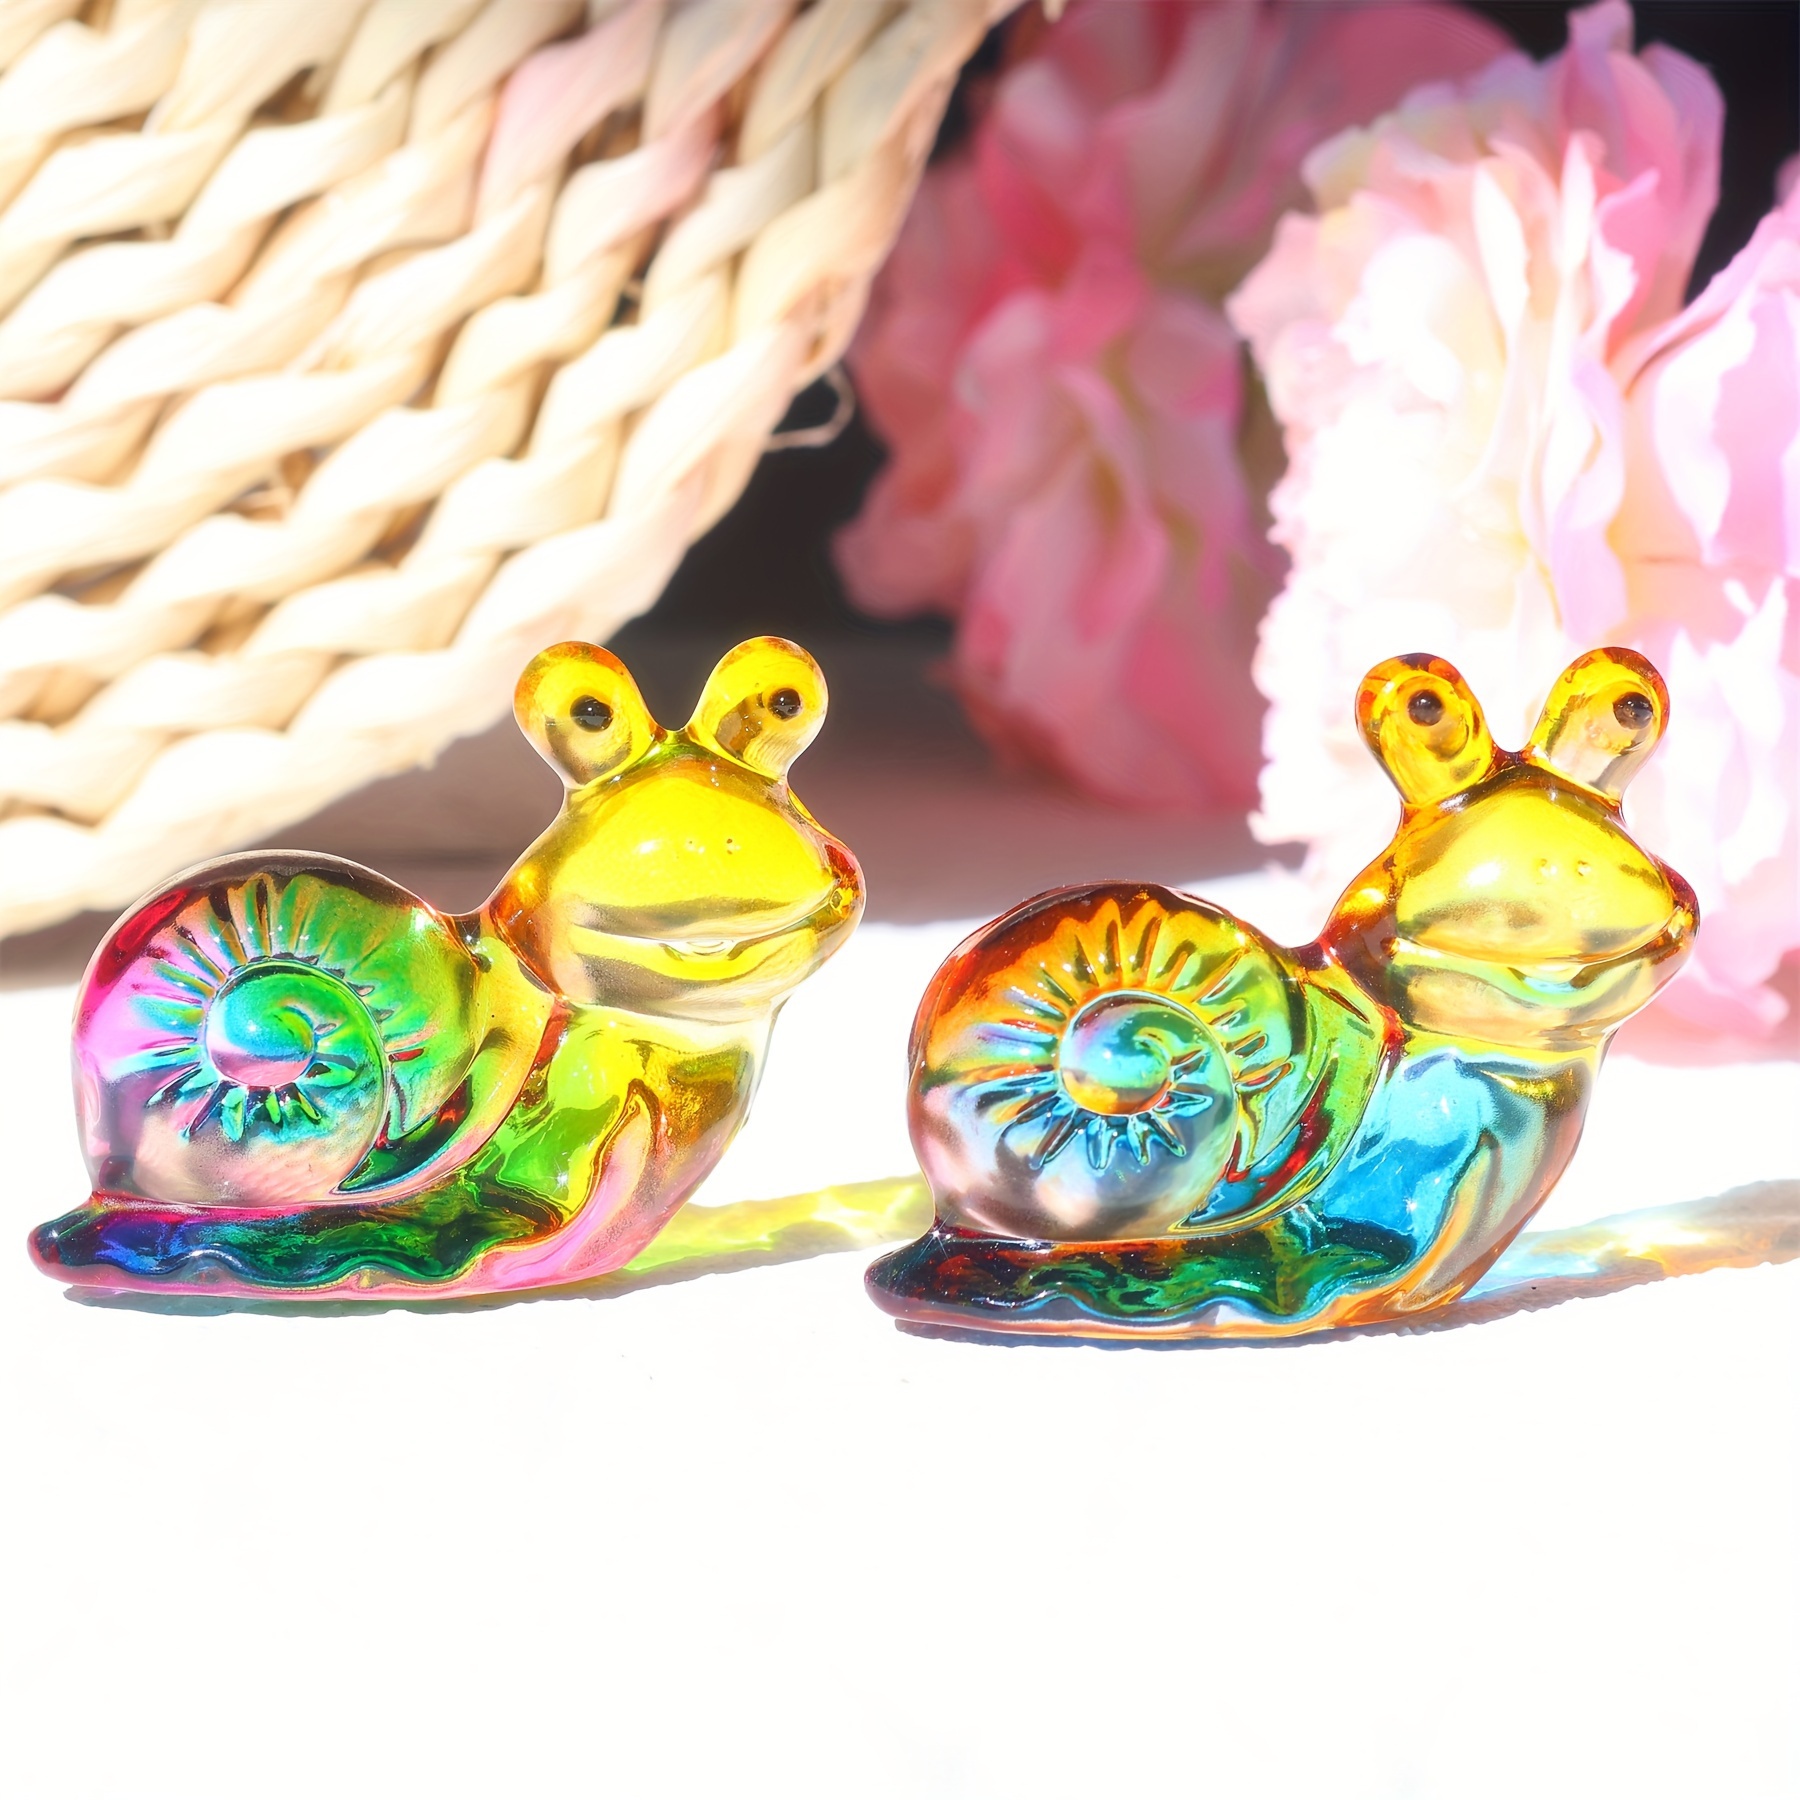 1pc glass snail figurine festive ornament for study bedroom decor home accents halloween christmas birthday valentines day holiday gift